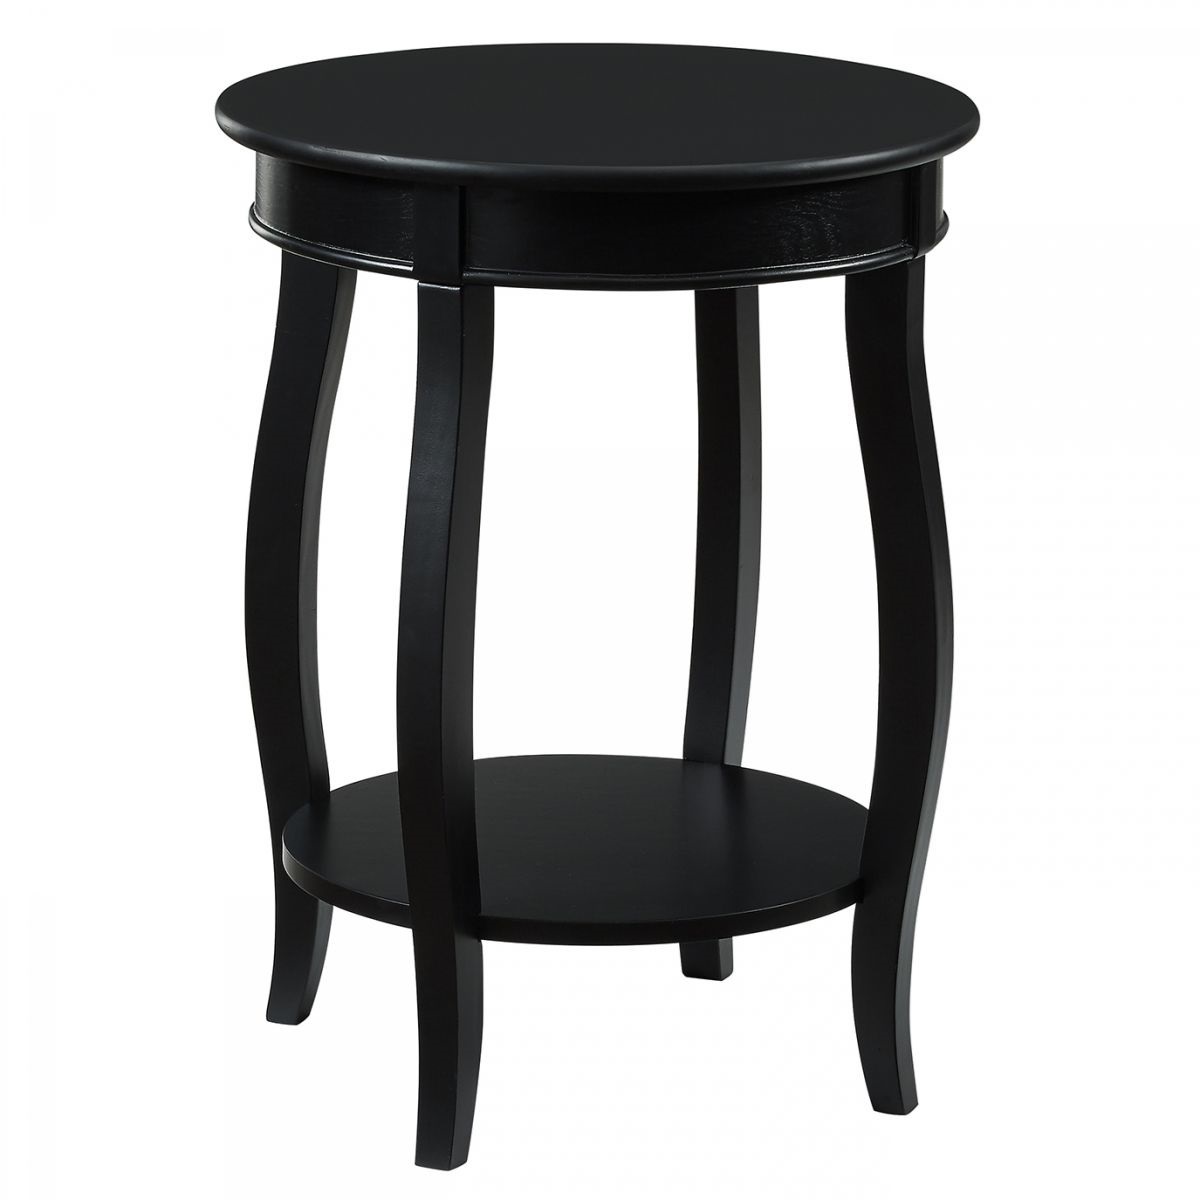 rainbow black round accent table badcock more ture pottery barn metal side chair pads target with storage white circle end wood nightstand drawers mirror diy sliding door wine bar